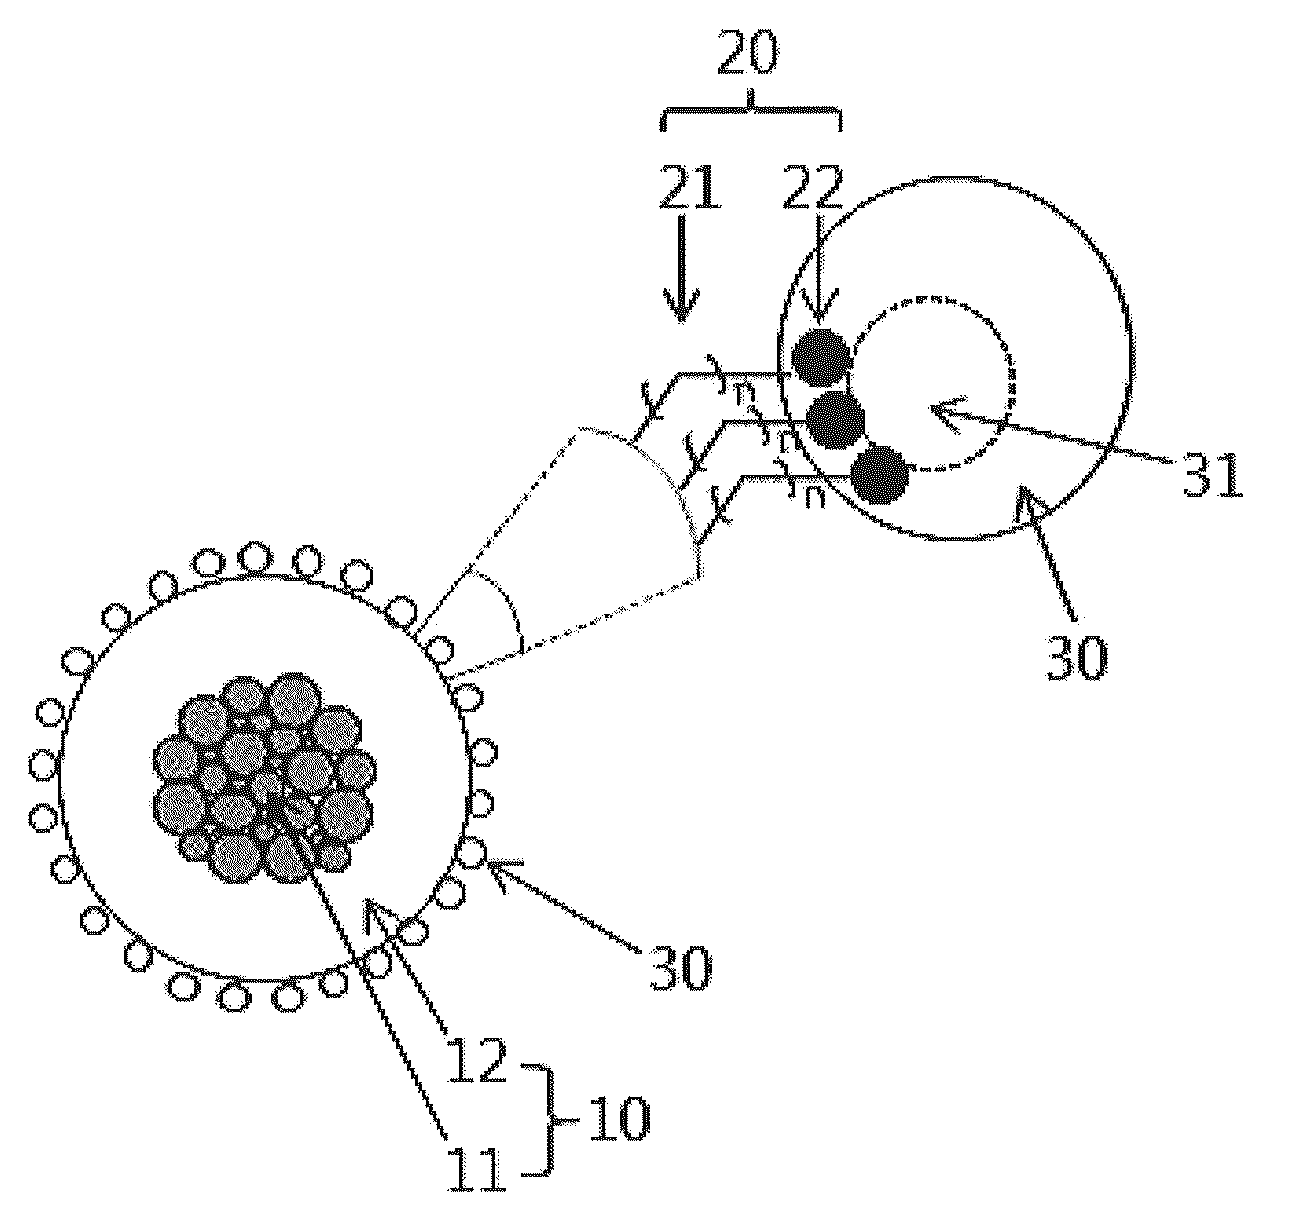 Recyclable porous bead - satellite nanoparticle composite and fabrication method thereof